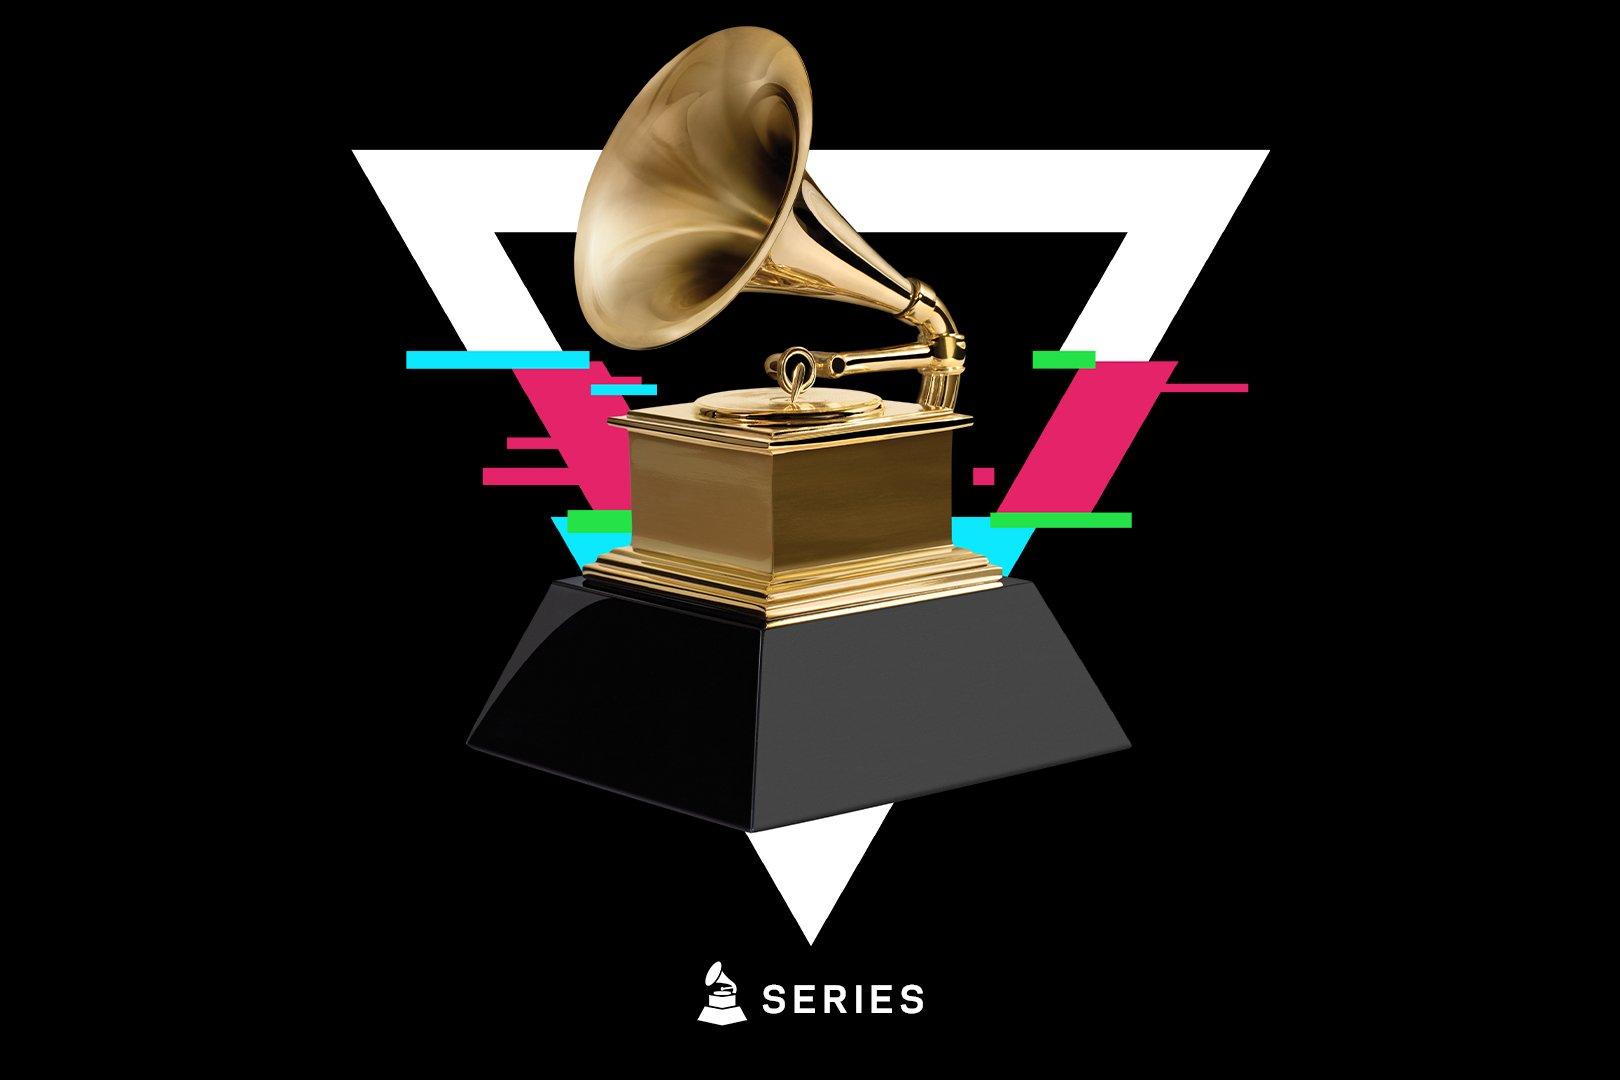 Artwork for 62nd Annual GRAMMY Awards Collection